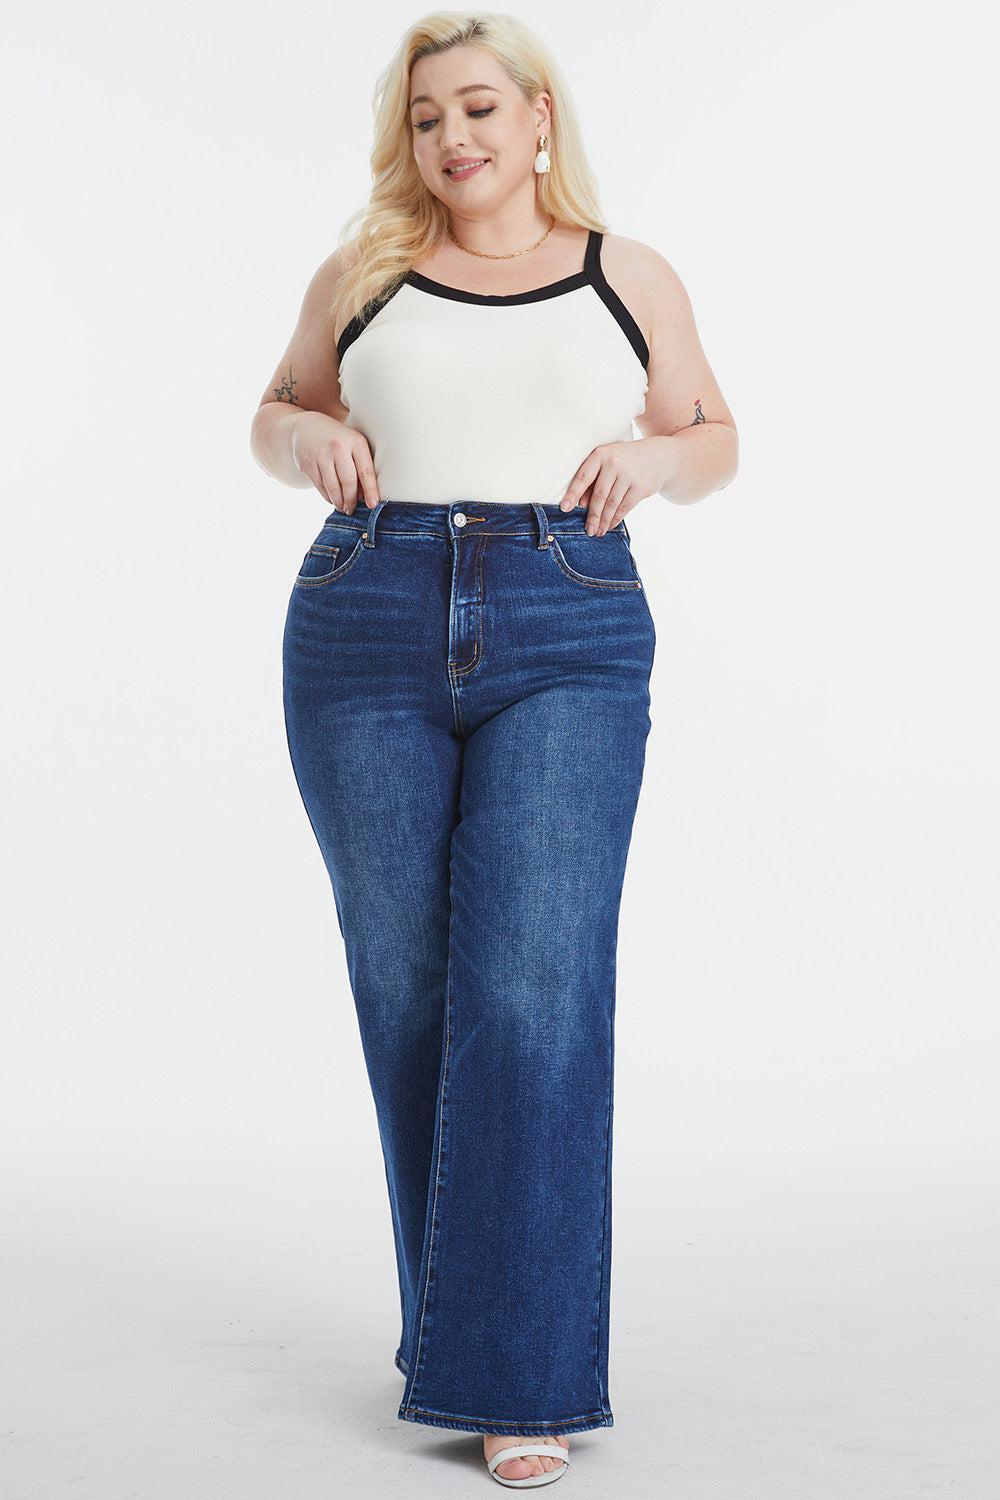 a woman in a white top and blue jeans